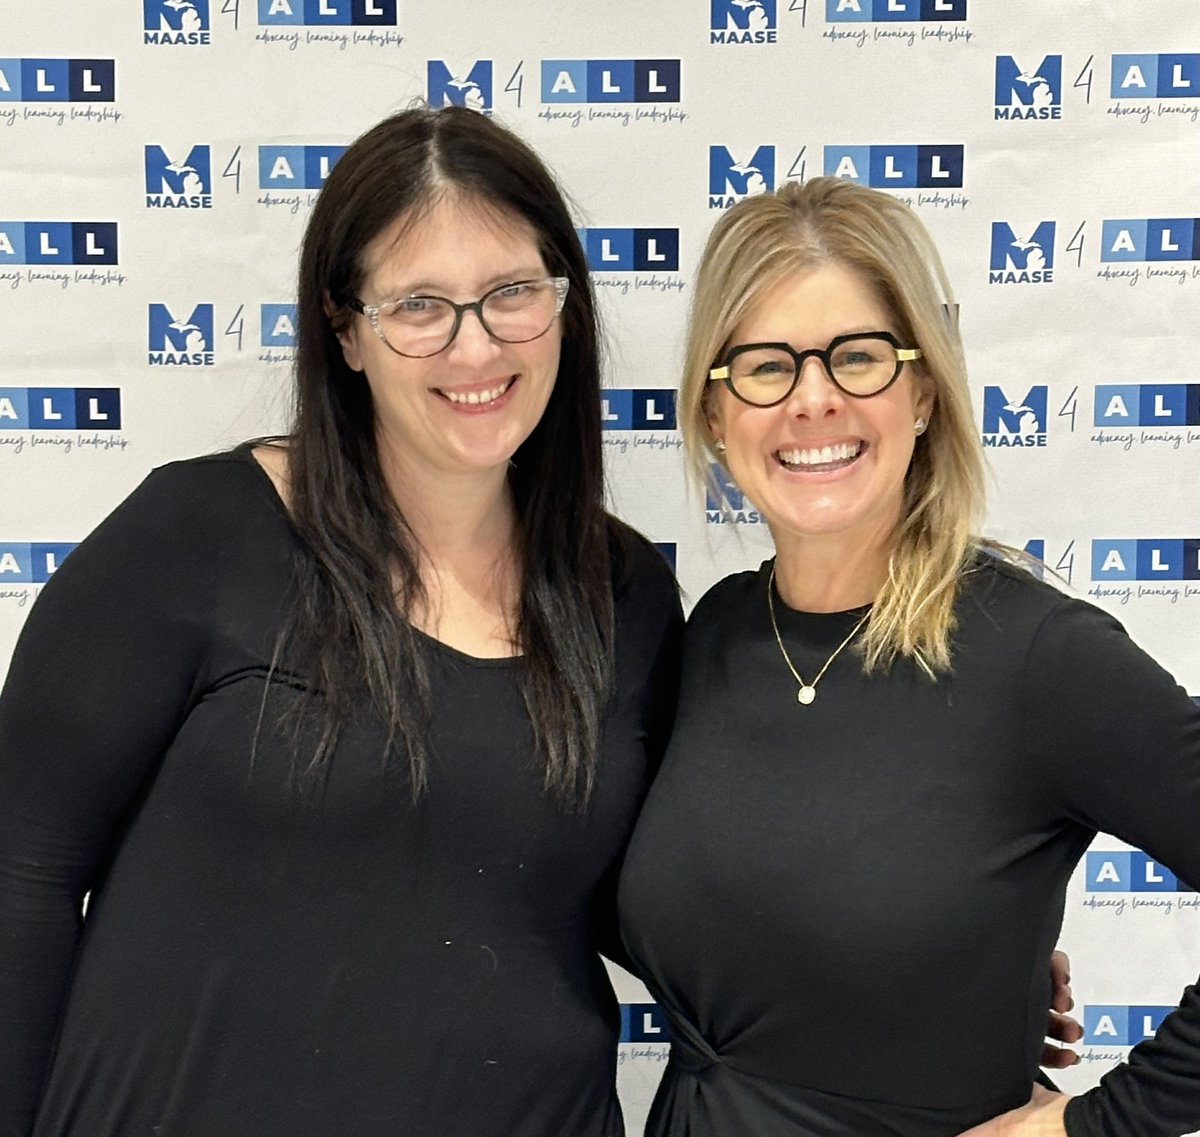 Still savoring the opportunity to attend @MAASEMichigan SLIP last week and connect with autism educators including our @stageslearning ARIS Thrive Grant 2023 winner, Anne May from Warren Consolidated!